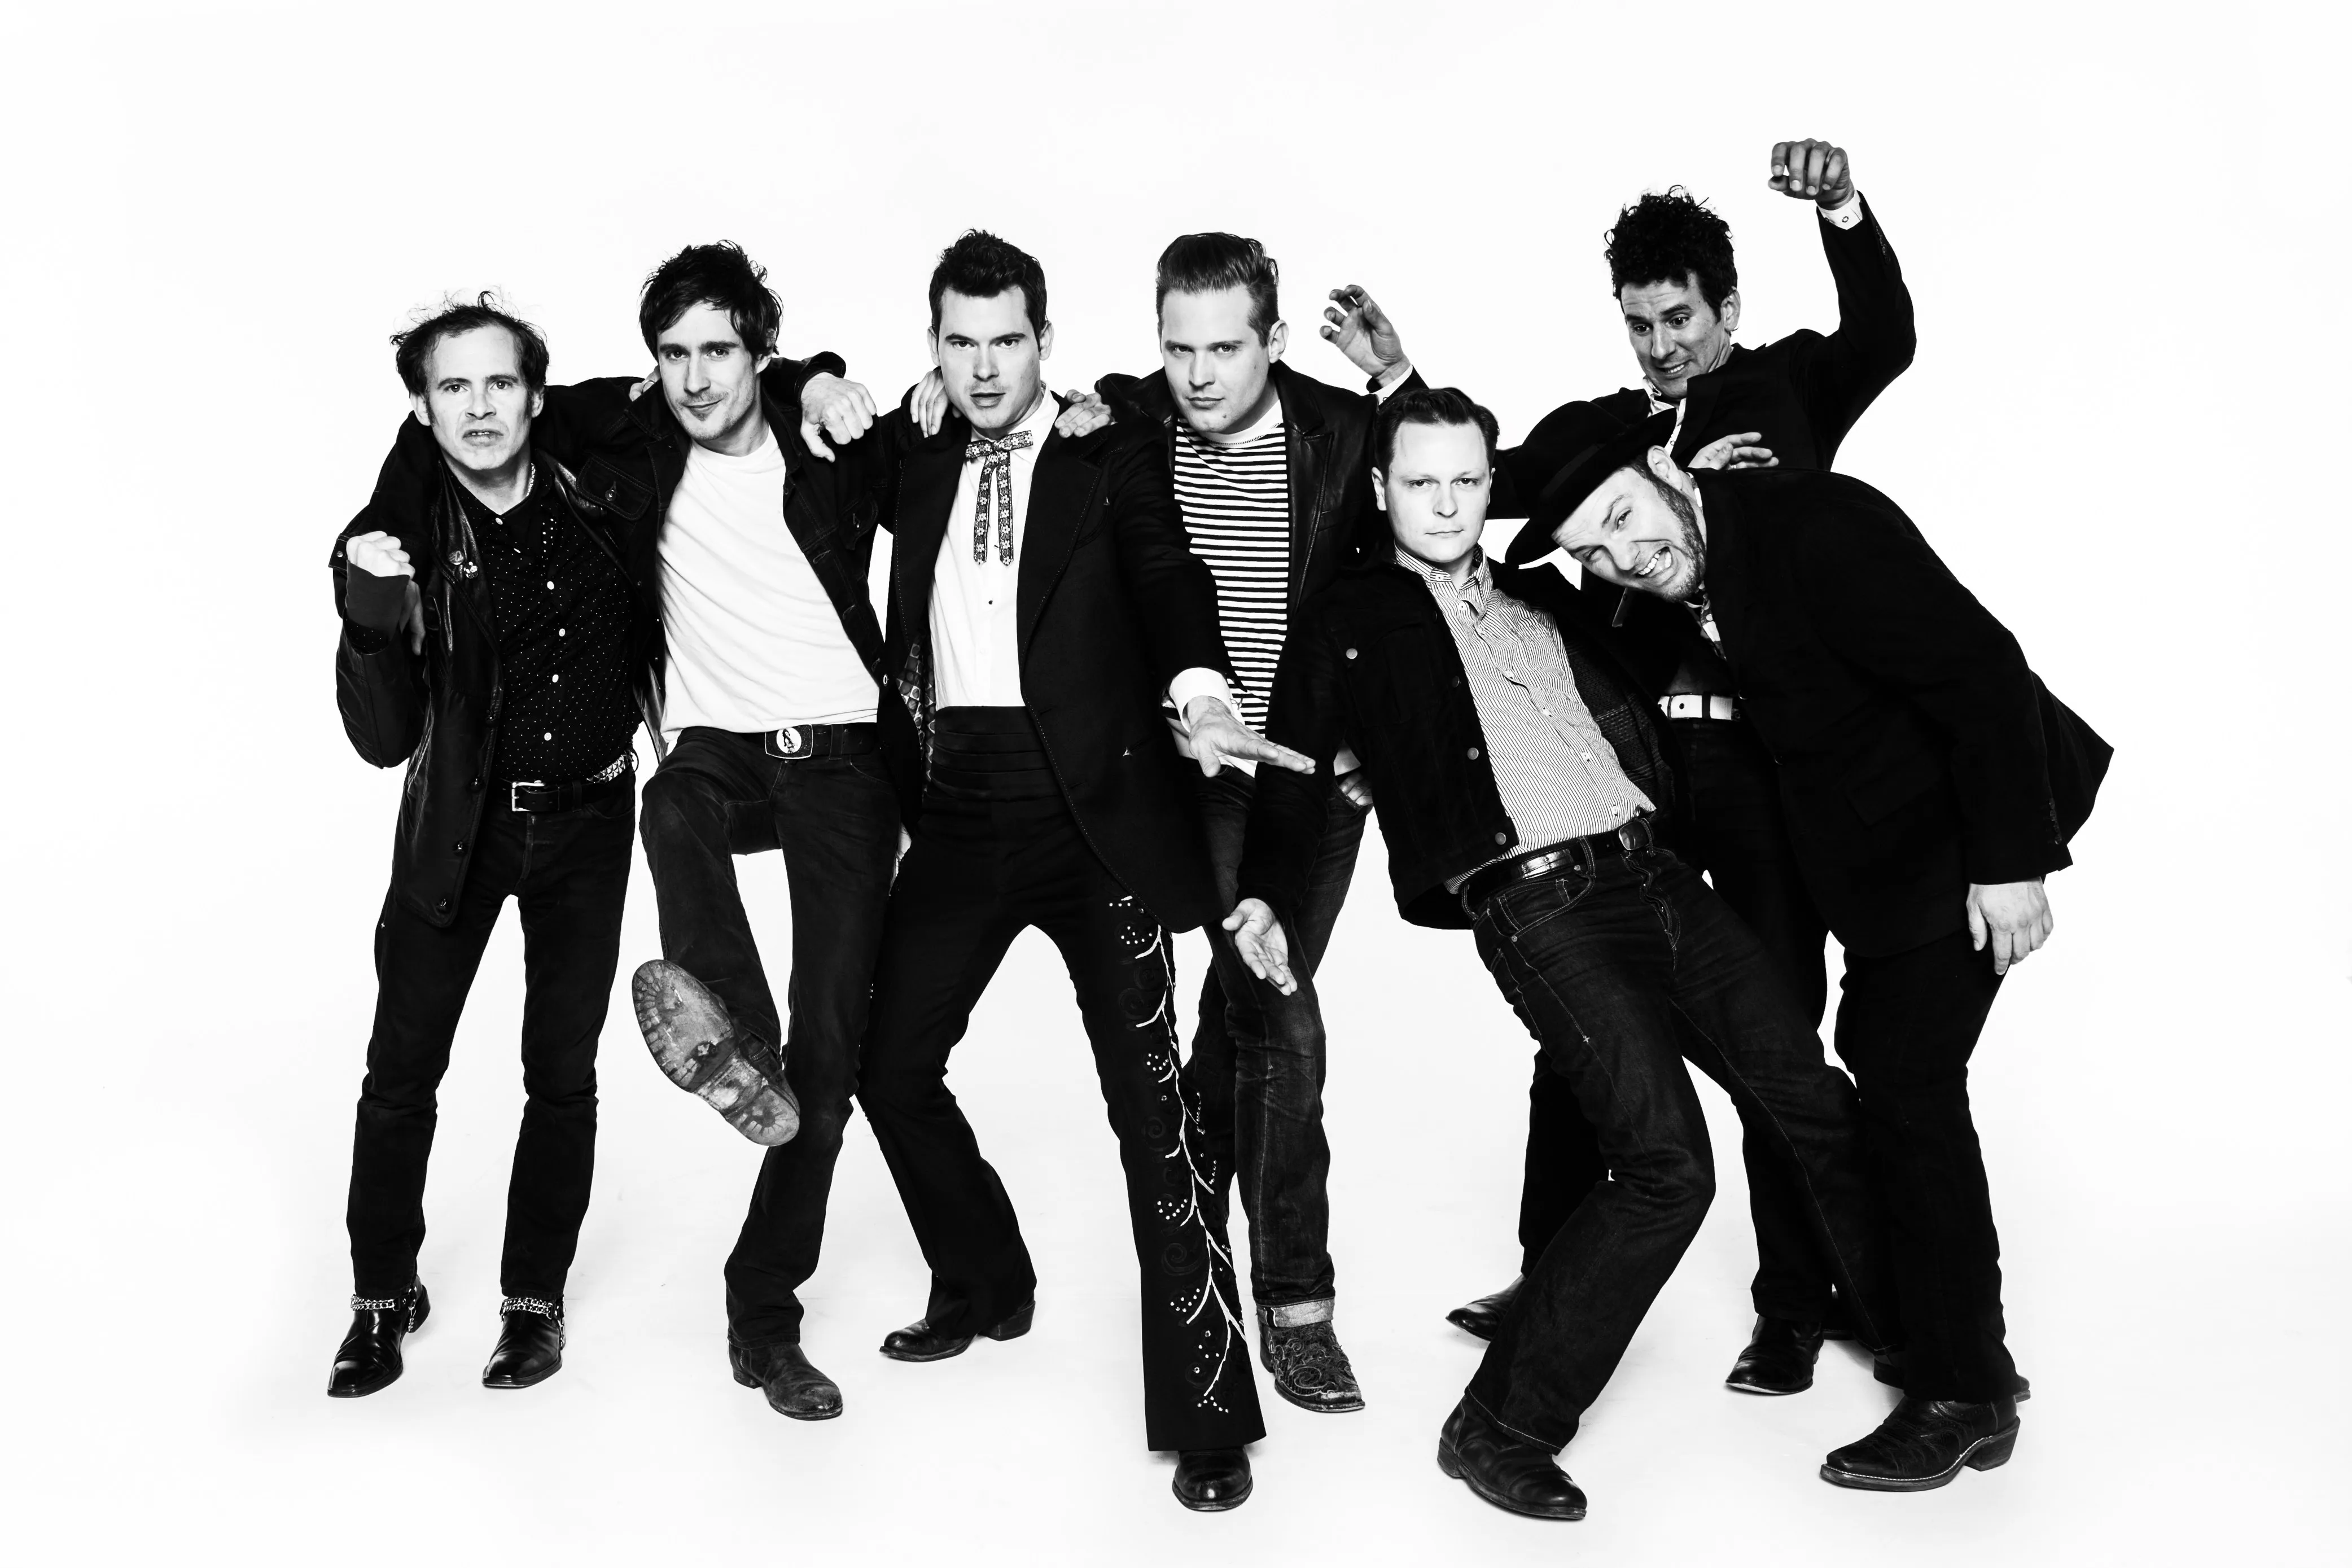 Bob Dylan And Old Crow Medicine Show Team Up Again For “Sweet Amarillo”